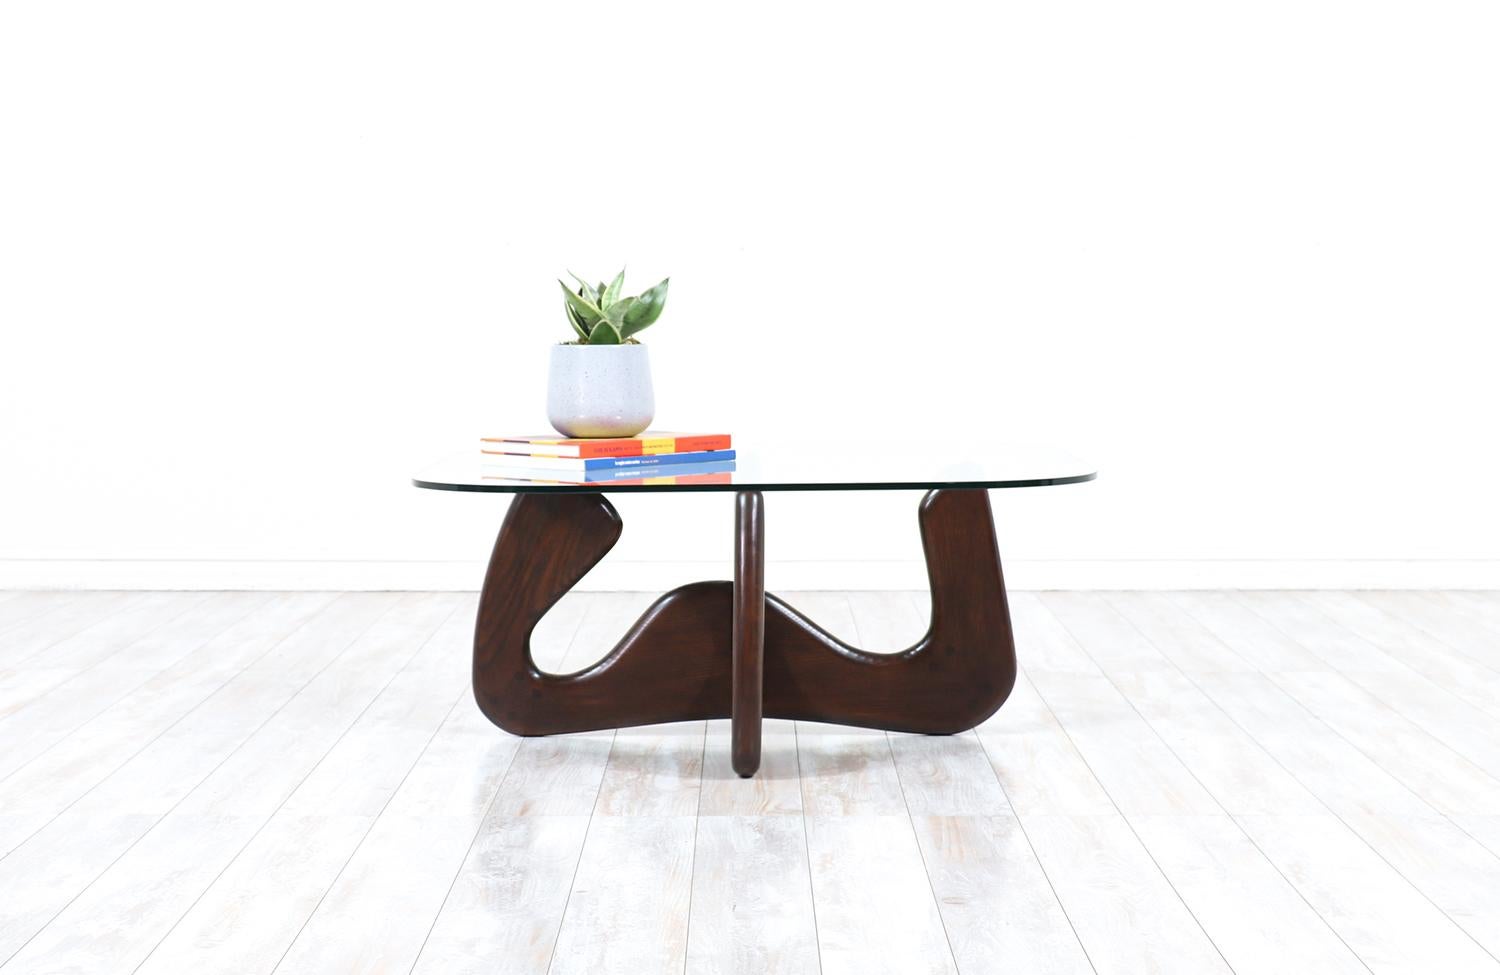 Mid-Century Modern biomorphic coffee table with glass top.